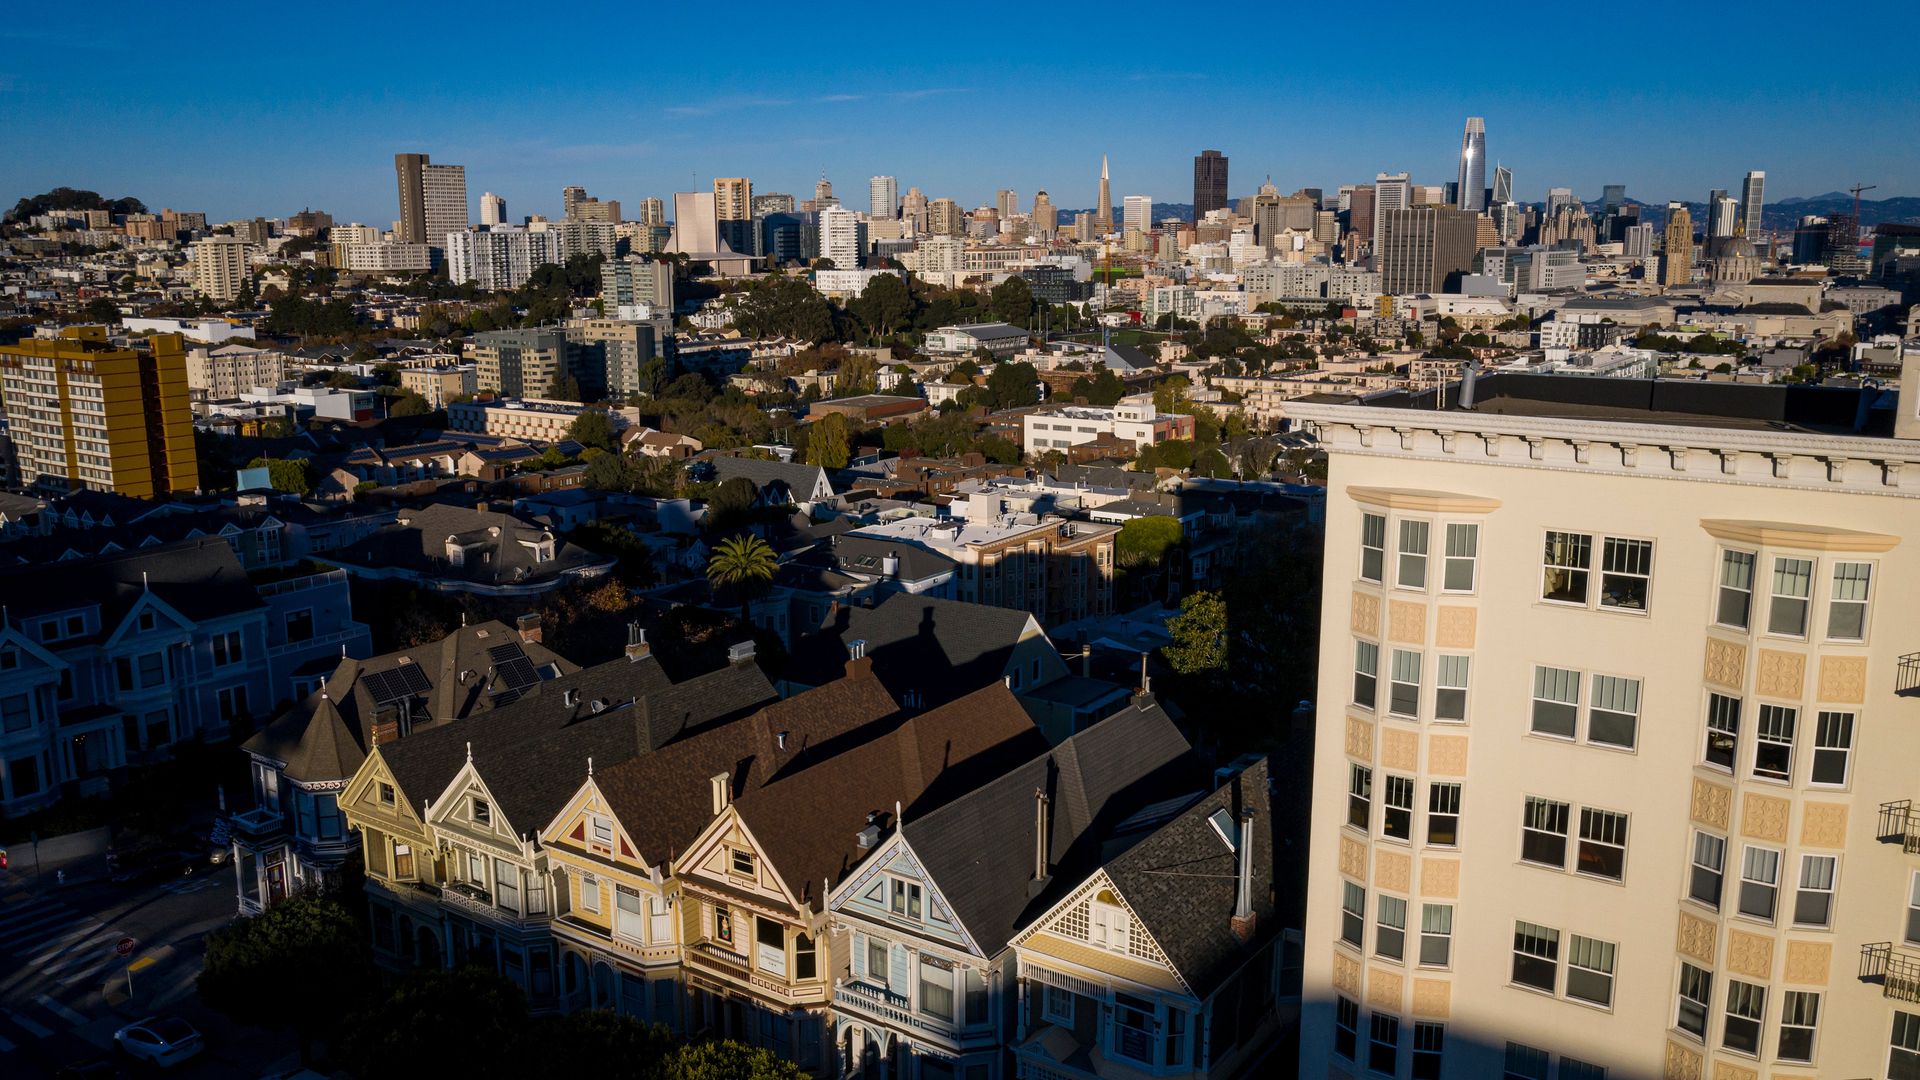 Birds eye view of Painted Lady houses in San Francisco